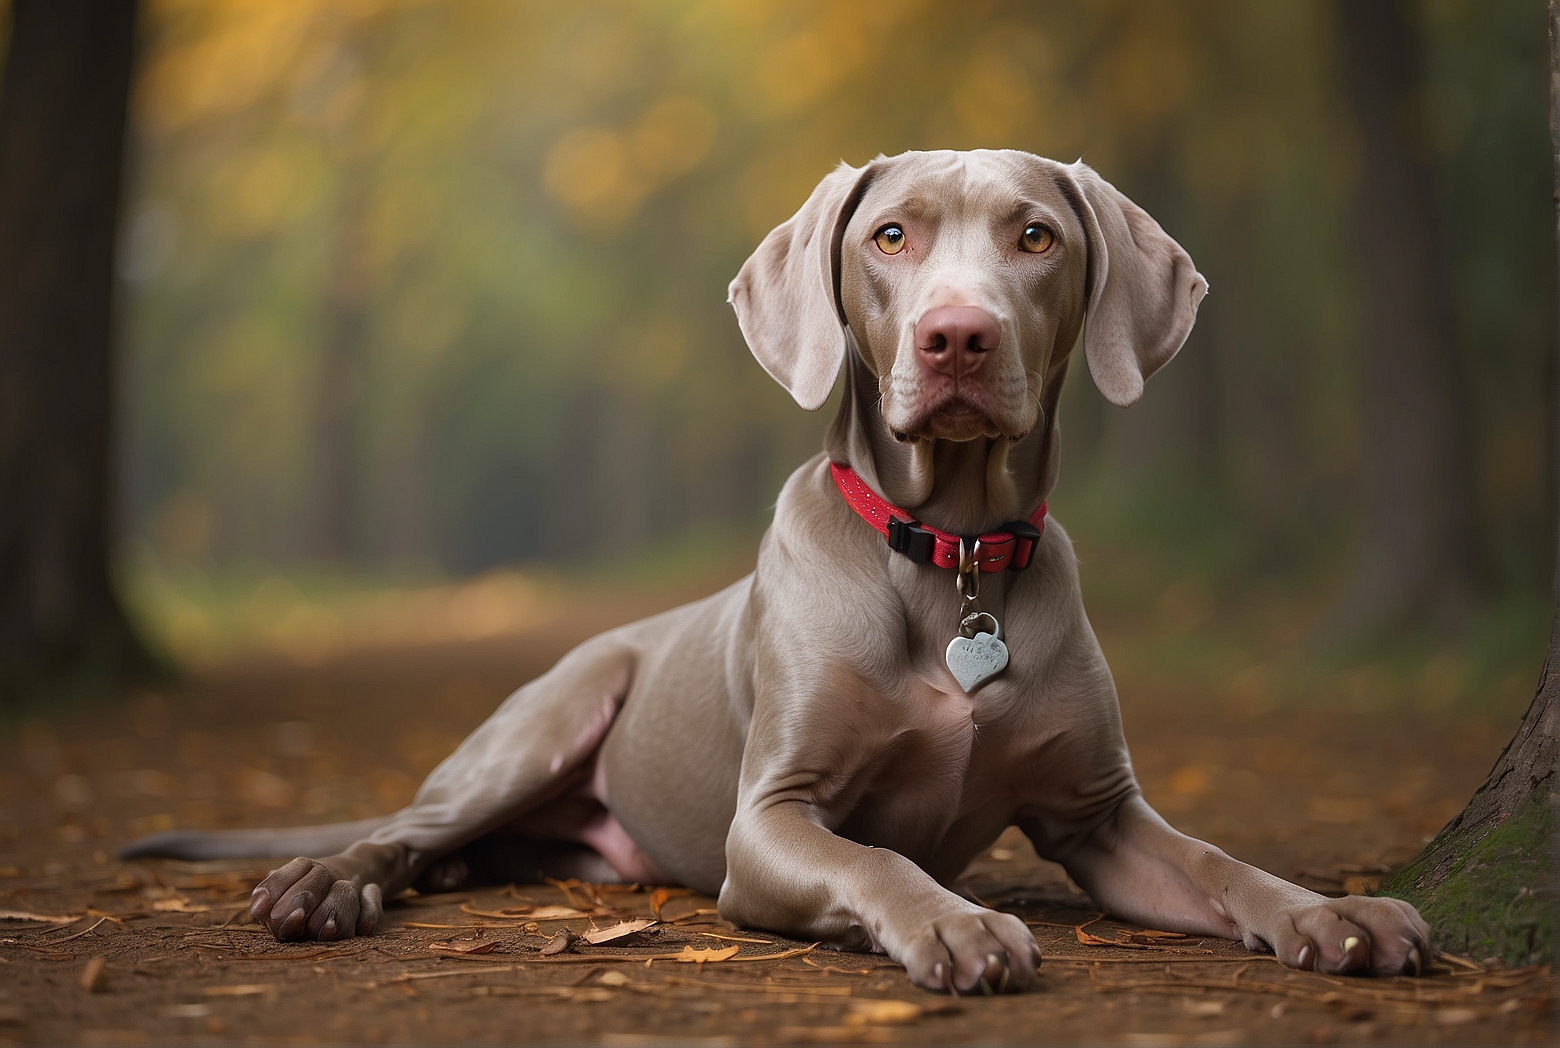 How Much Does a Trained Weimaraner Cost?